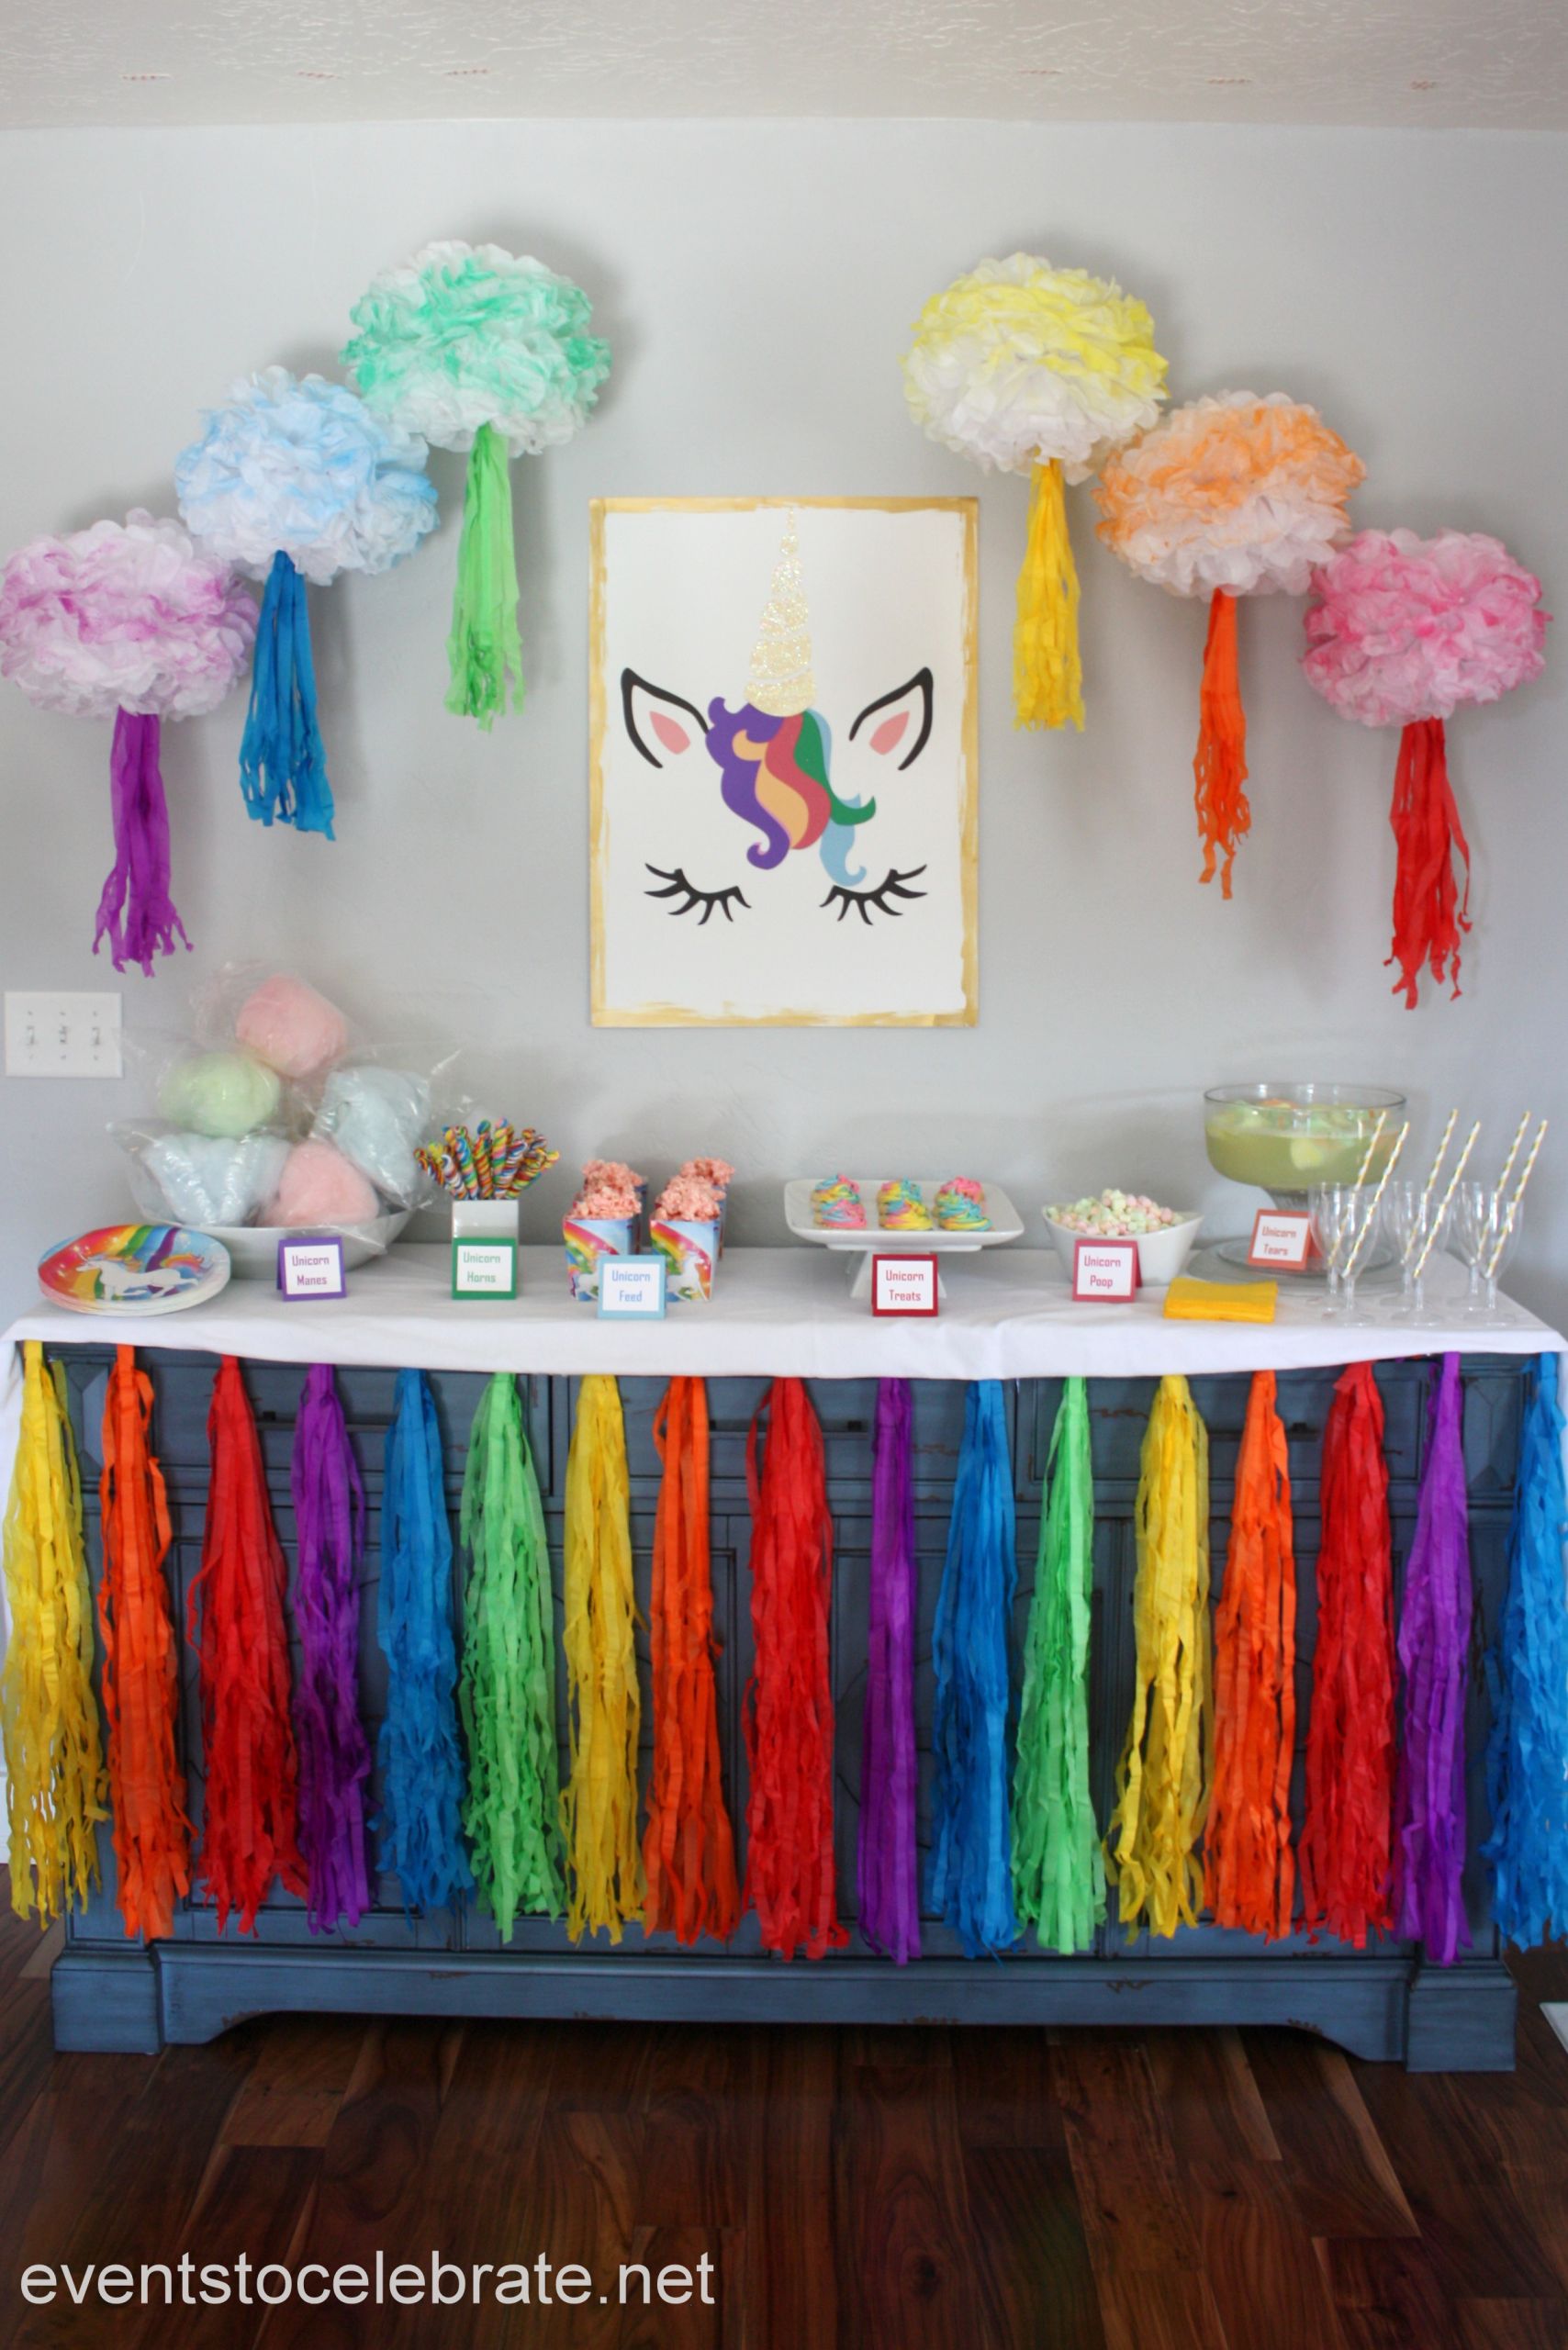 Unicorn Party Decoration Ideas
 Unicorn Party Decorations and Food